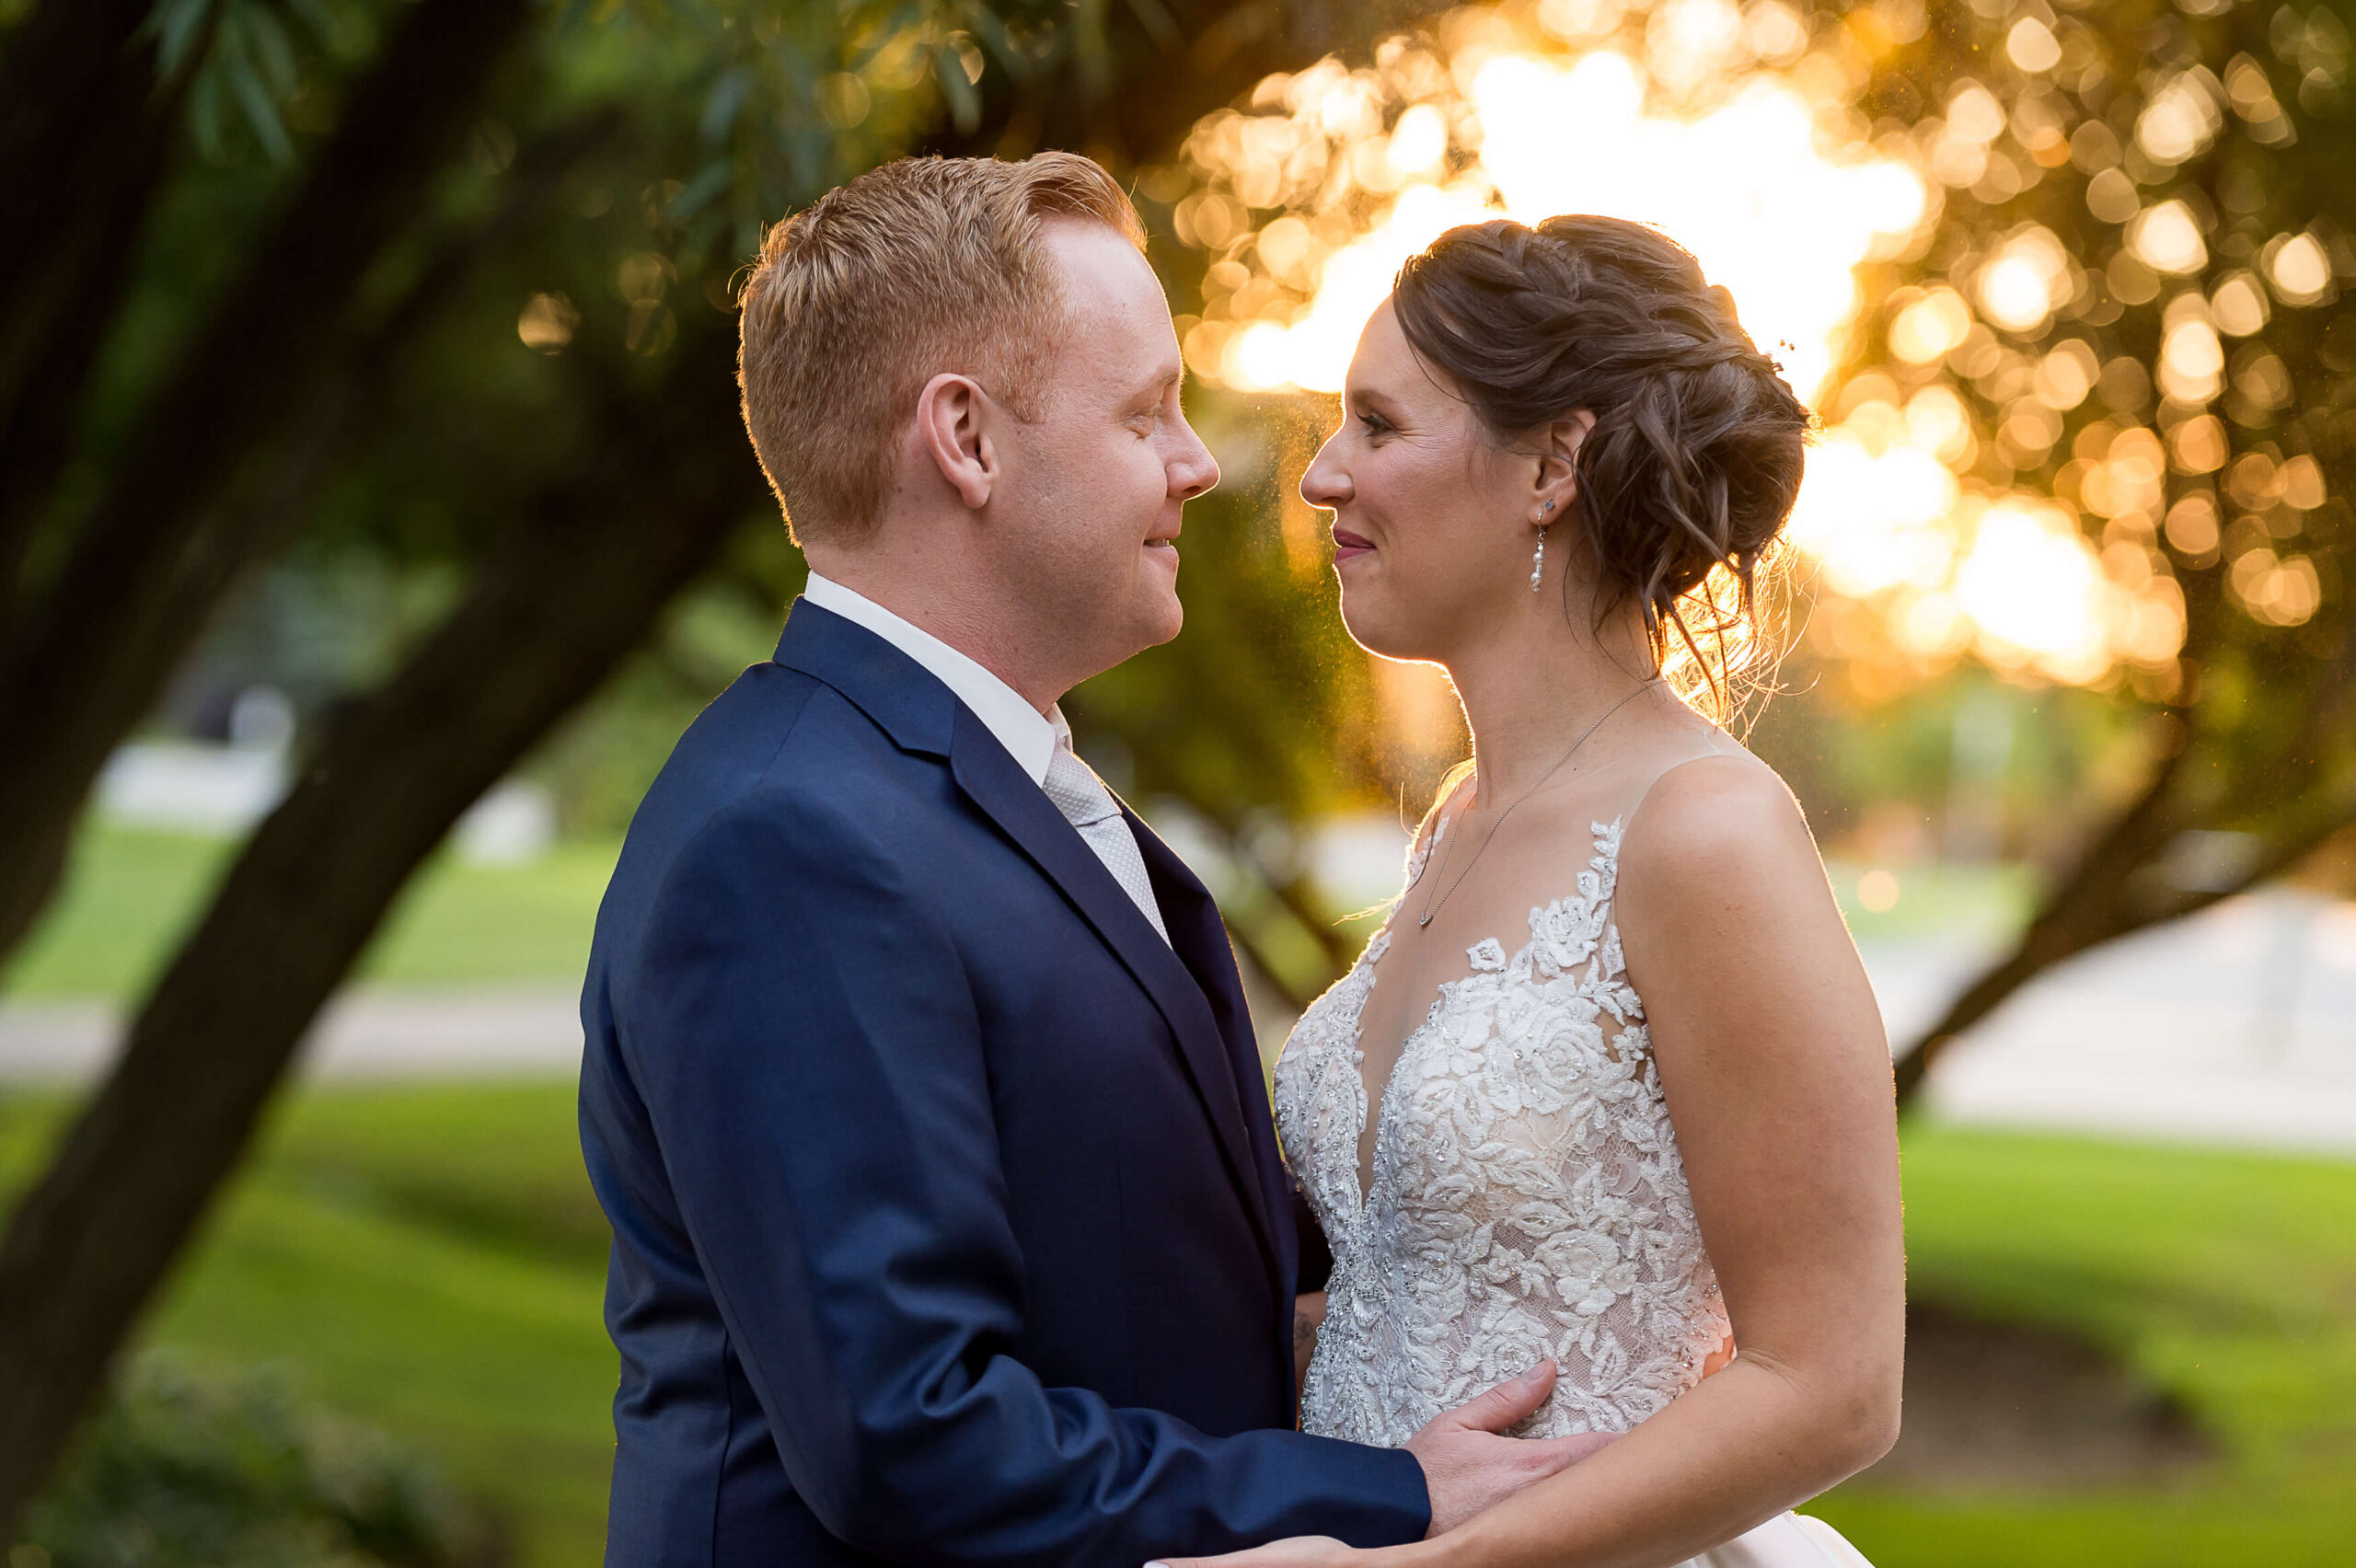 a golden hour sunset photo of a bride smiling into the eyes of her groom in a blue suit. Taken outdoors on the greens of The Marshes wedding venue